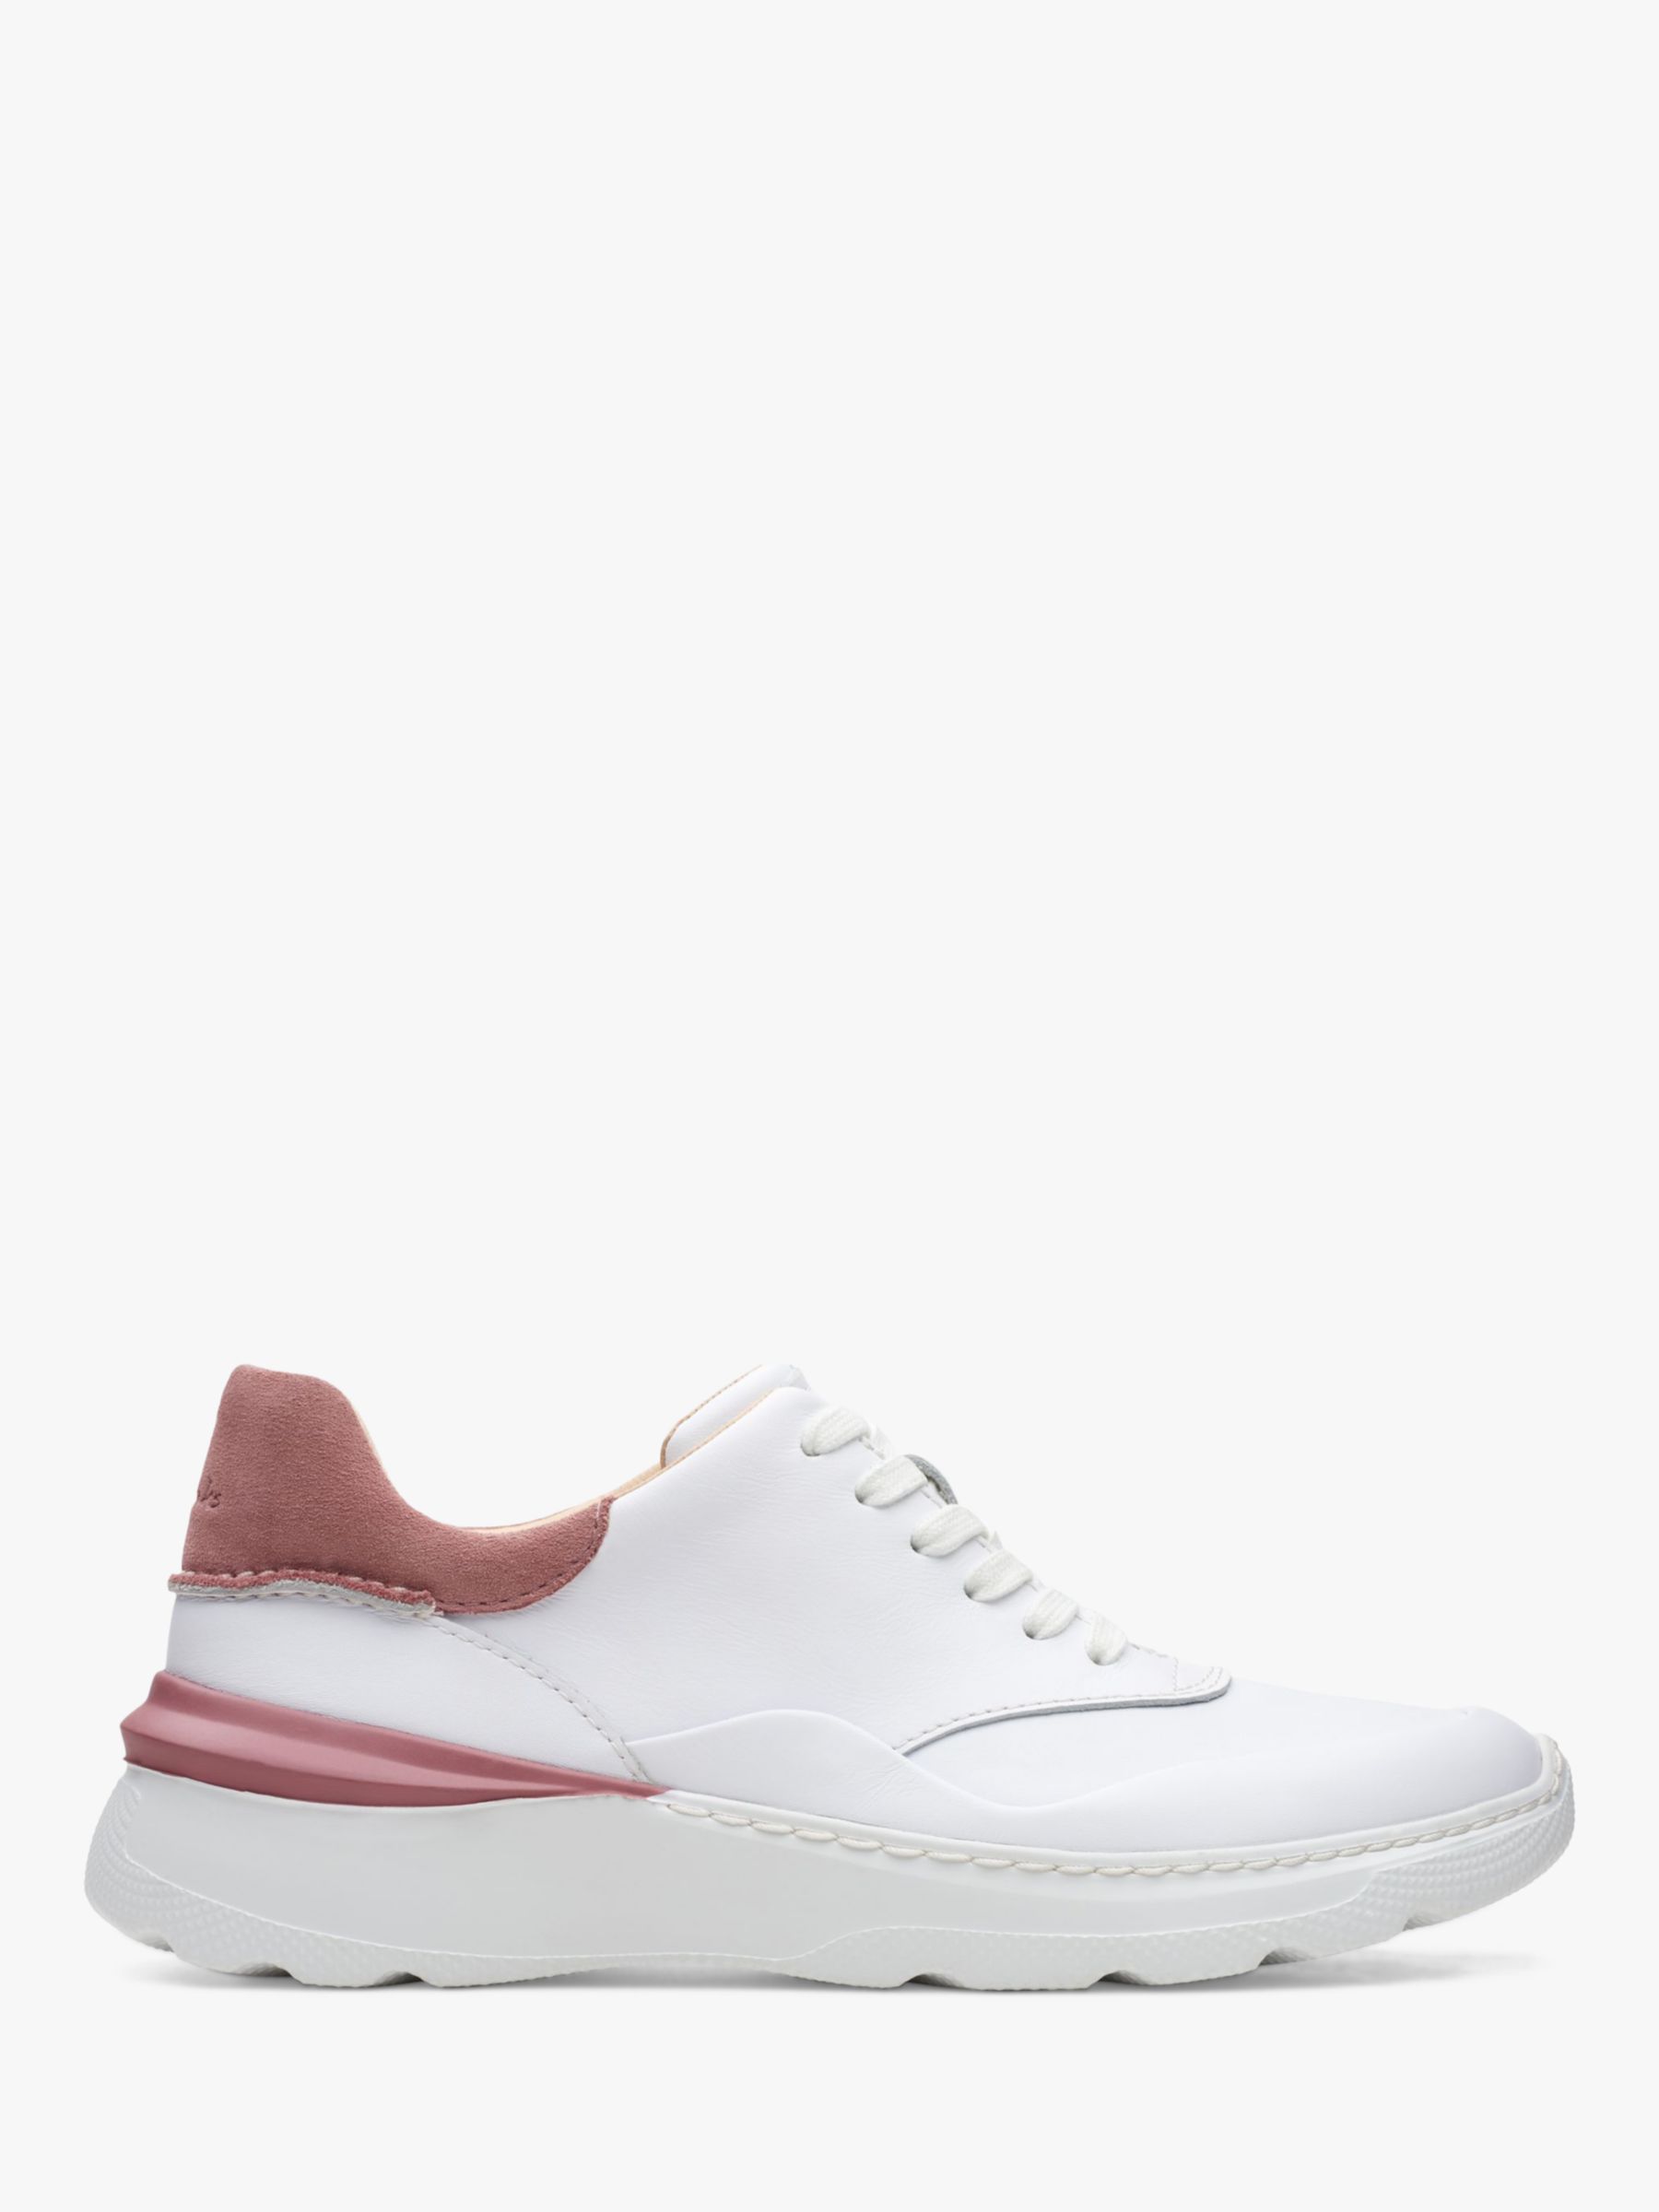 Clarks Sprint Lite Lace Up Leather Trainers, White Rose Combi at John ...